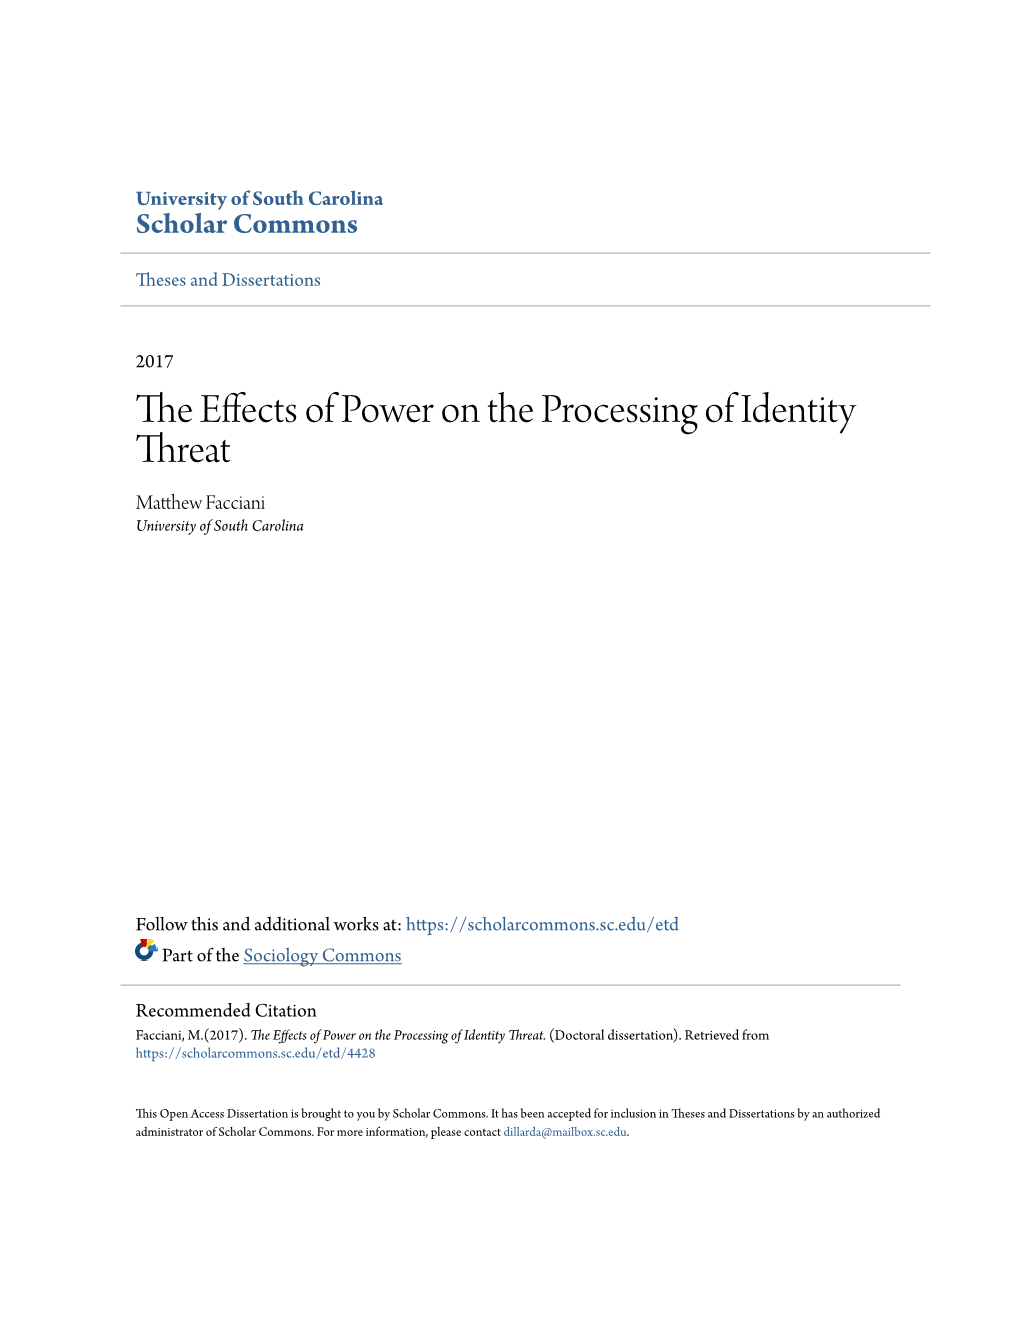 The Effects of Power on the Processing of Identity Threat